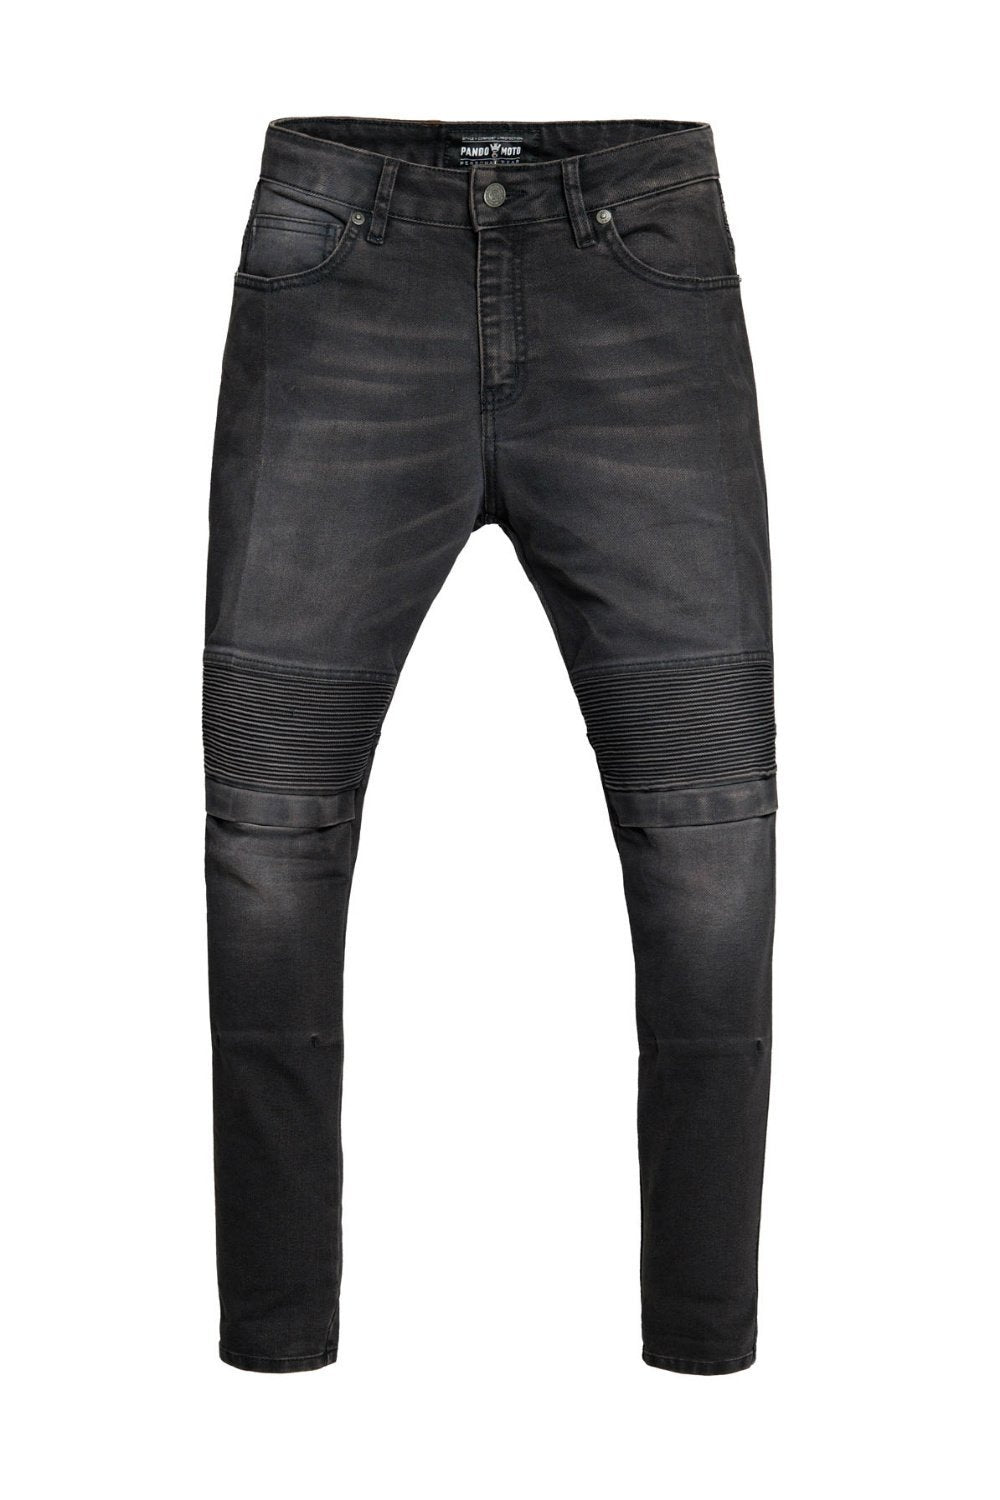 PANDO MOTO - style, function, protection.  Moto style, Motorcycle jeans,  Denim jeans